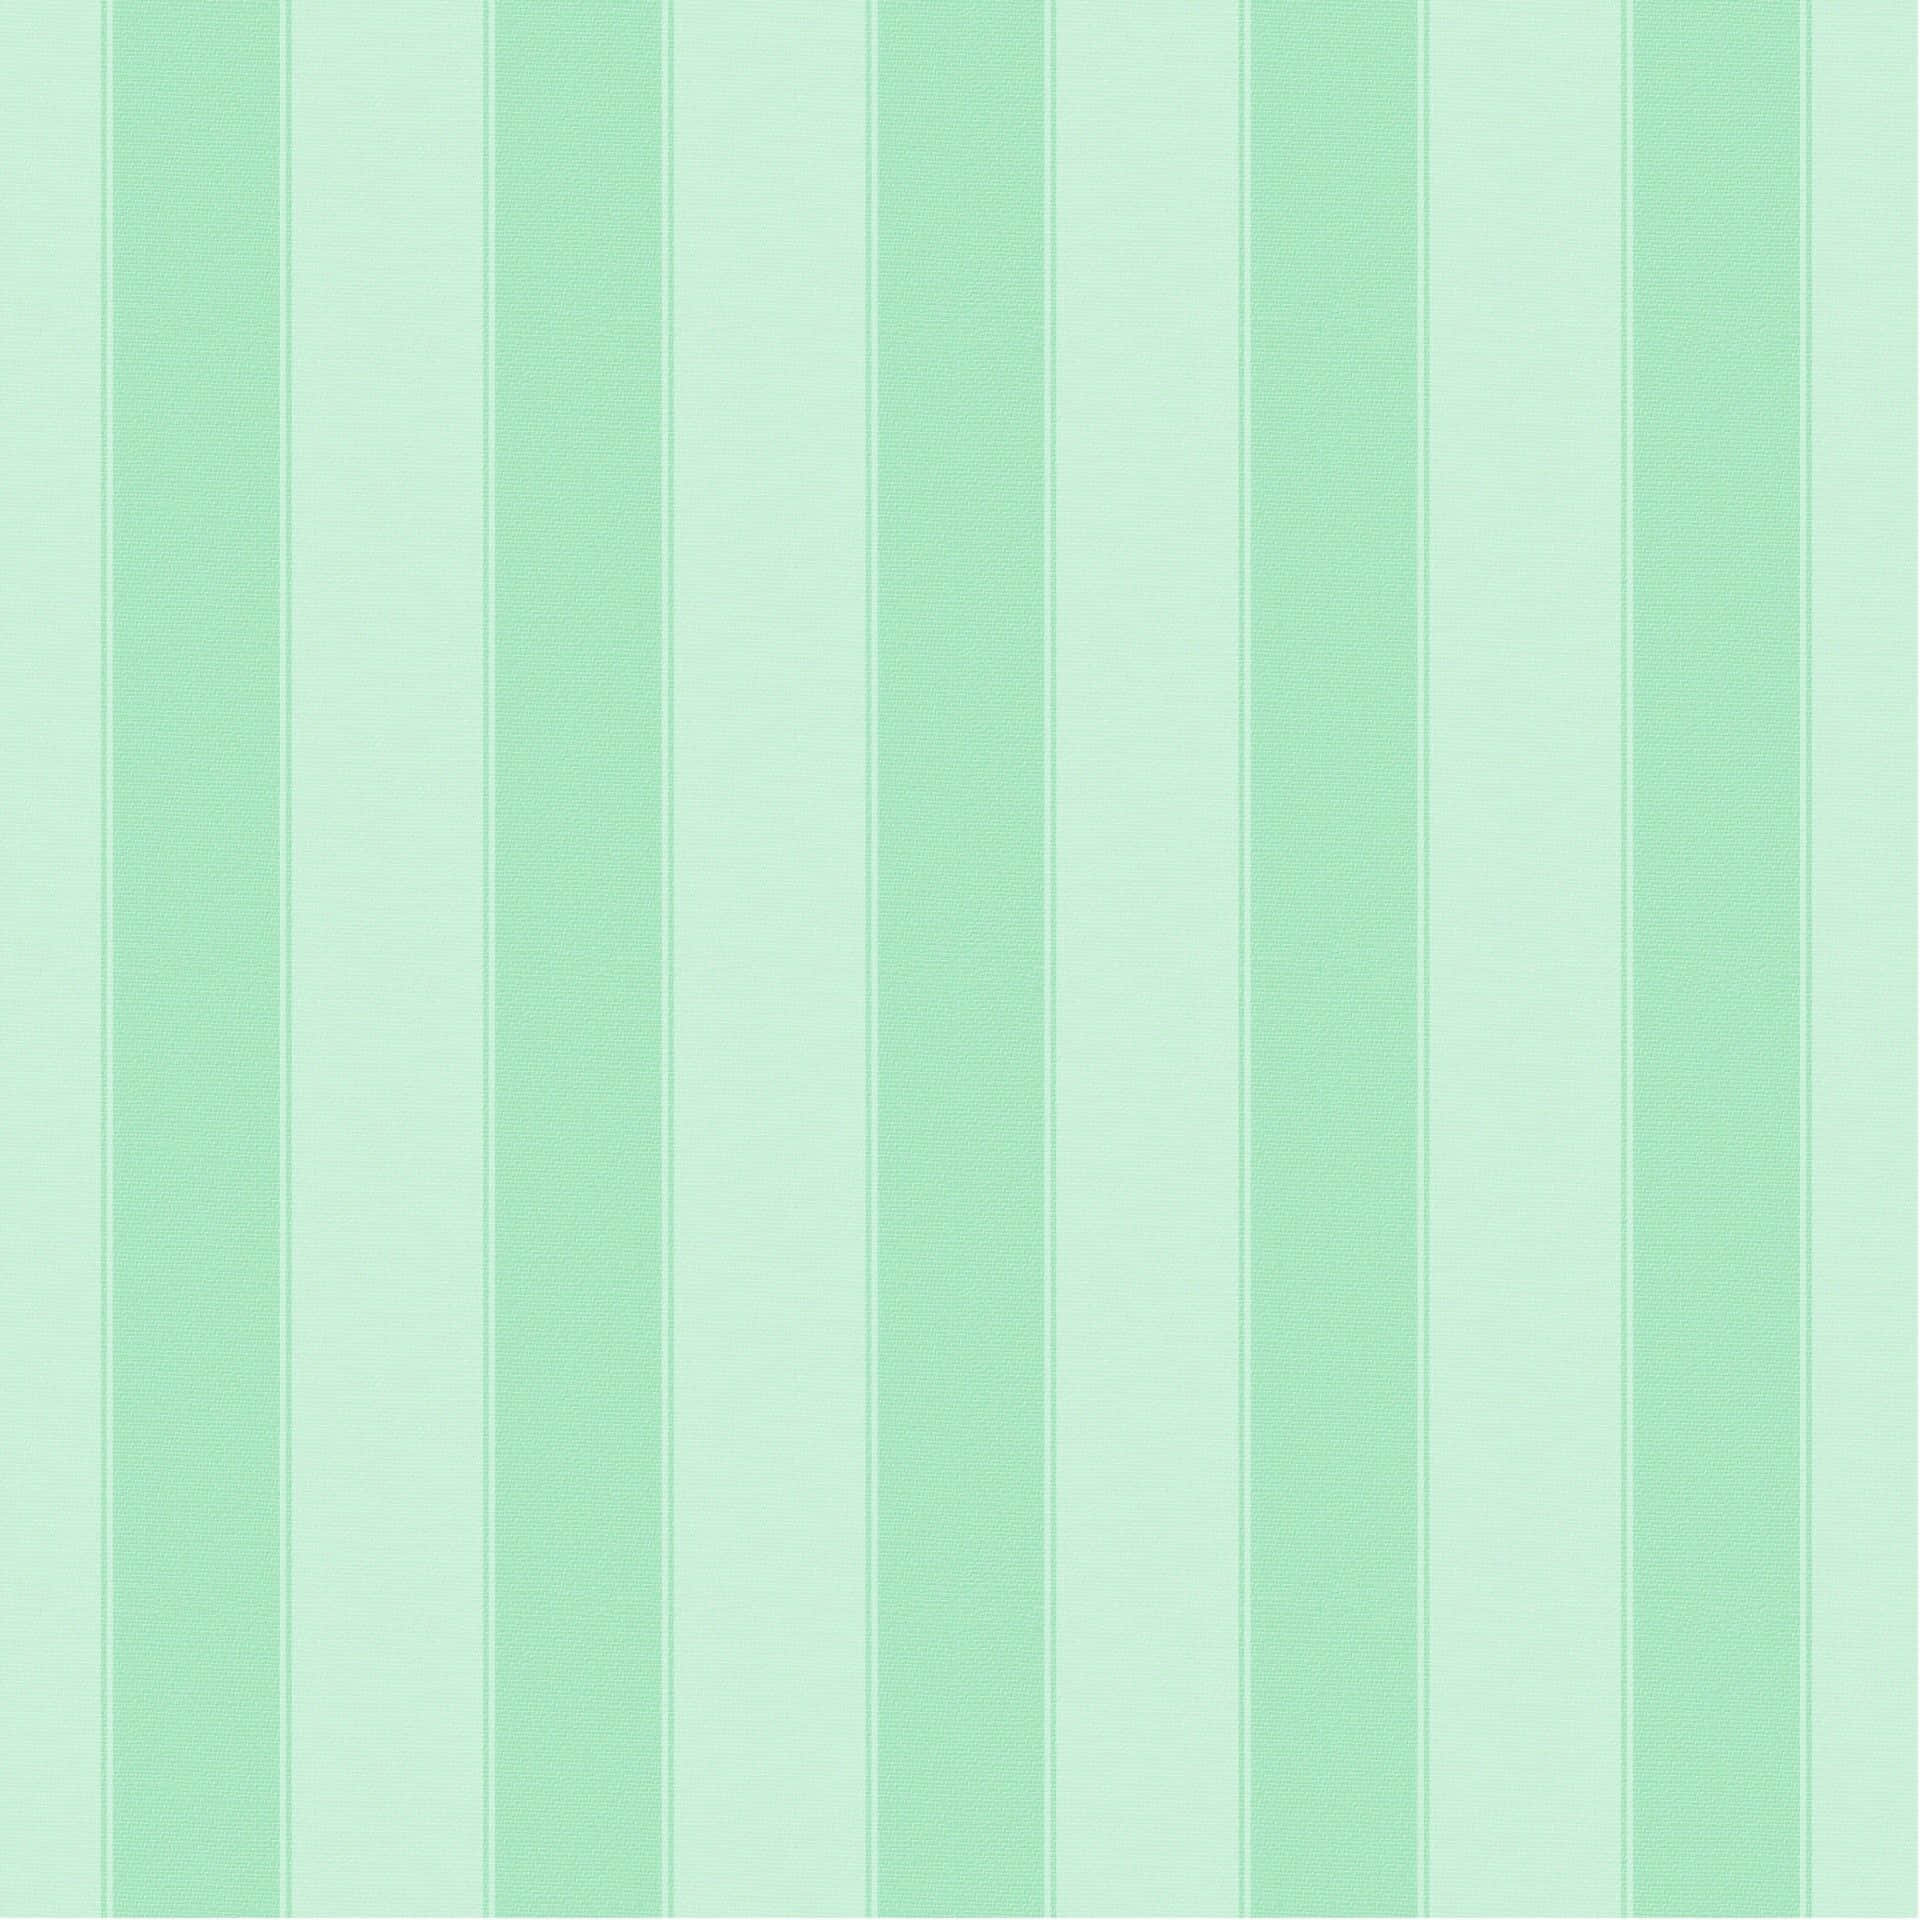 A bright green Mint background for all your banking needs